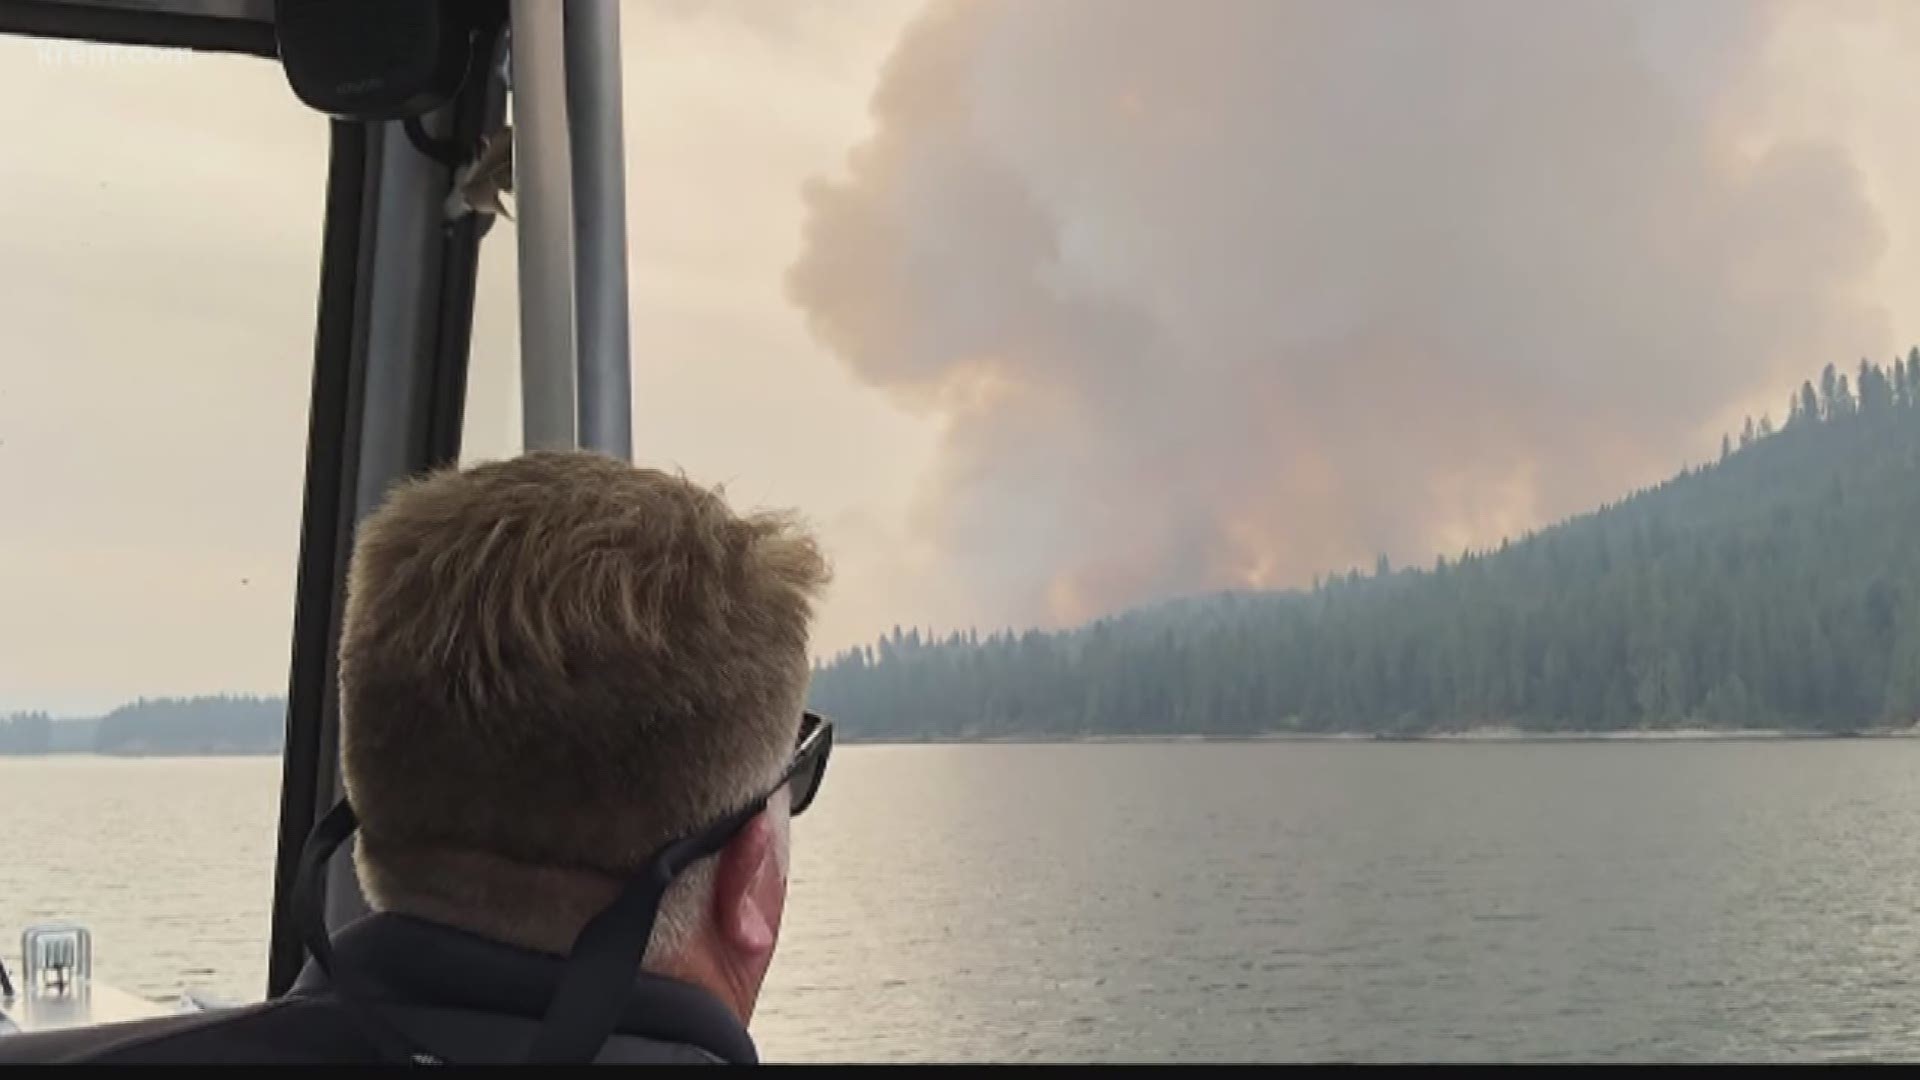 The North Mill Creek Fire has been fully contained, but two more wildfires are still burning lands in the Inland Northwest.